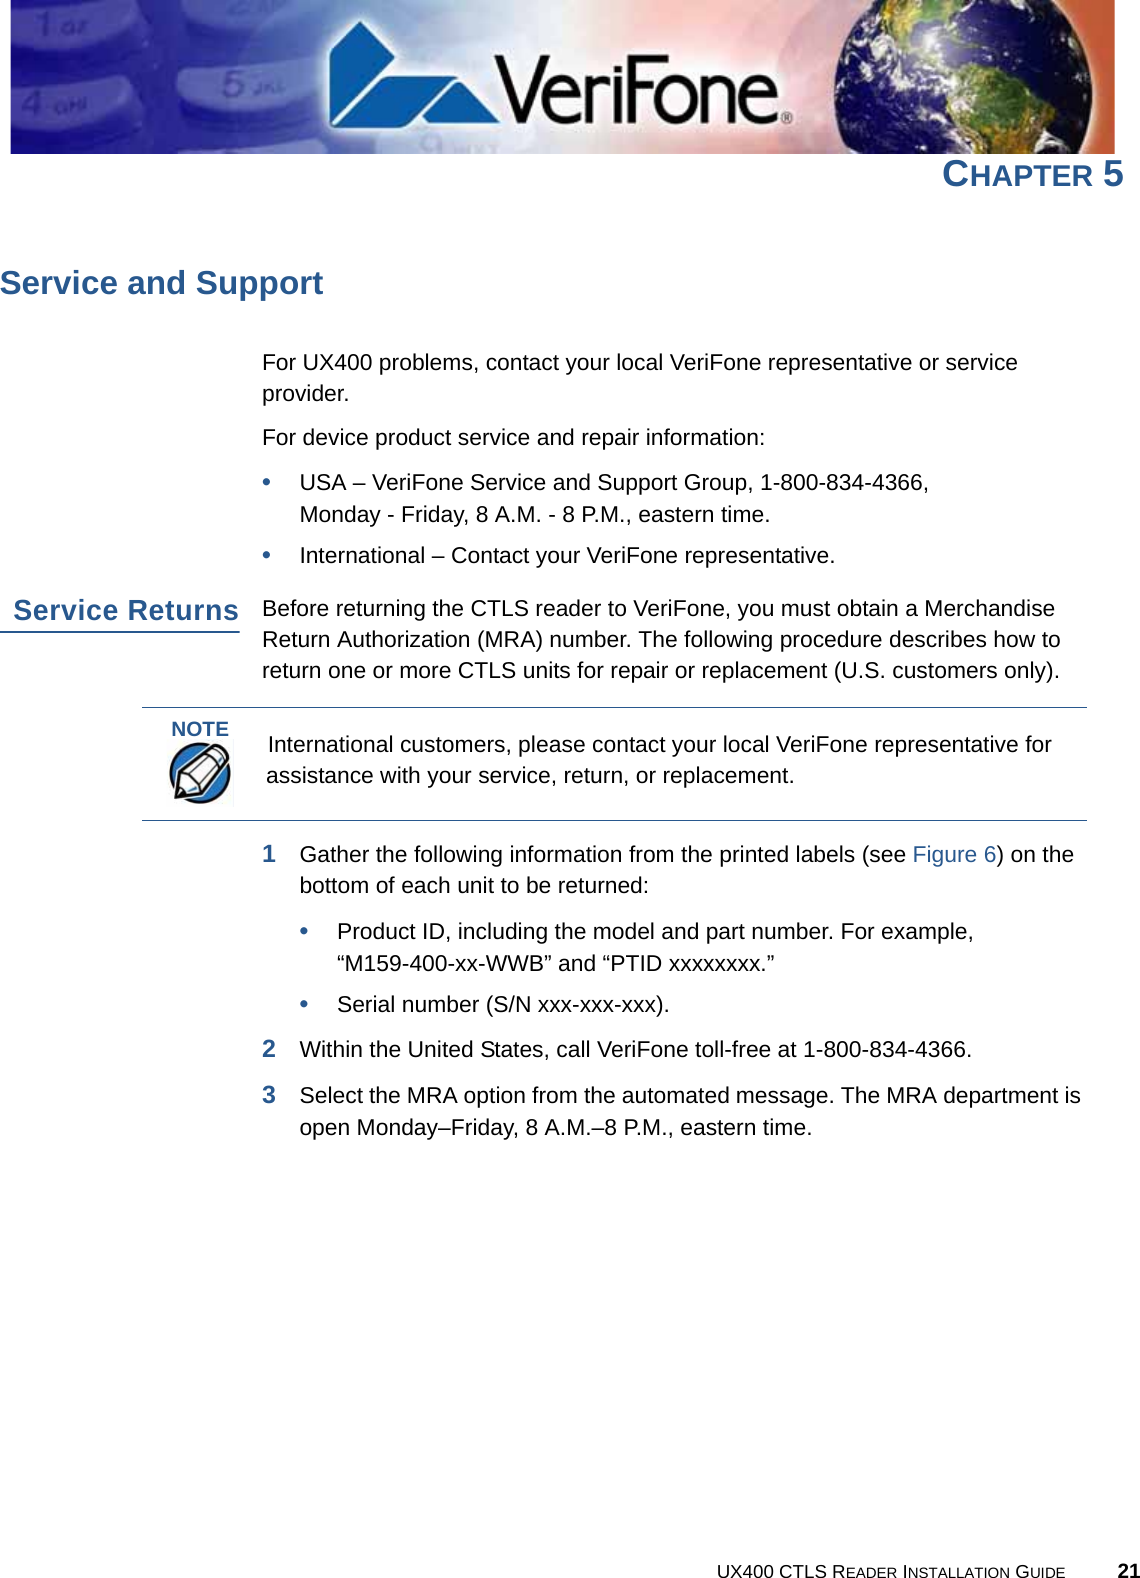 UX400 CTLS READER INSTALLATION GUIDE 21CHAPTER 5Service and SupportFor UX400 problems, contact your local VeriFone representative or service provider.For device product service and repair information:•USA – VeriFone Service and Support Group, 1-800-834-4366, Monday - Friday, 8 A.M. - 8 P.M., eastern time.•International – Contact your VeriFone representative.Service ReturnsBefore returning the CTLS reader to VeriFone, you must obtain a Merchandise Return Authorization (MRA) number. The following procedure describes how to return one or more CTLS units for repair or replacement (U.S. customers only).1Gather the following information from the printed labels (see Figure 6) on the bottom of each unit to be returned:•Product ID, including the model and part number. For example,“M159-400-xx-WWB” and “PTID xxxxxxxx.”•Serial number (S/N xxx-xxx-xxx).2Within the United States, call VeriFone toll-free at 1-800-834-4366.3Select the MRA option from the automated message. The MRA department is open Monday–Friday, 8 A.M.–8 P.M., eastern time.NOTEInternational customers, please contact your local VeriFone representative for assistance with your service, return, or replacement.